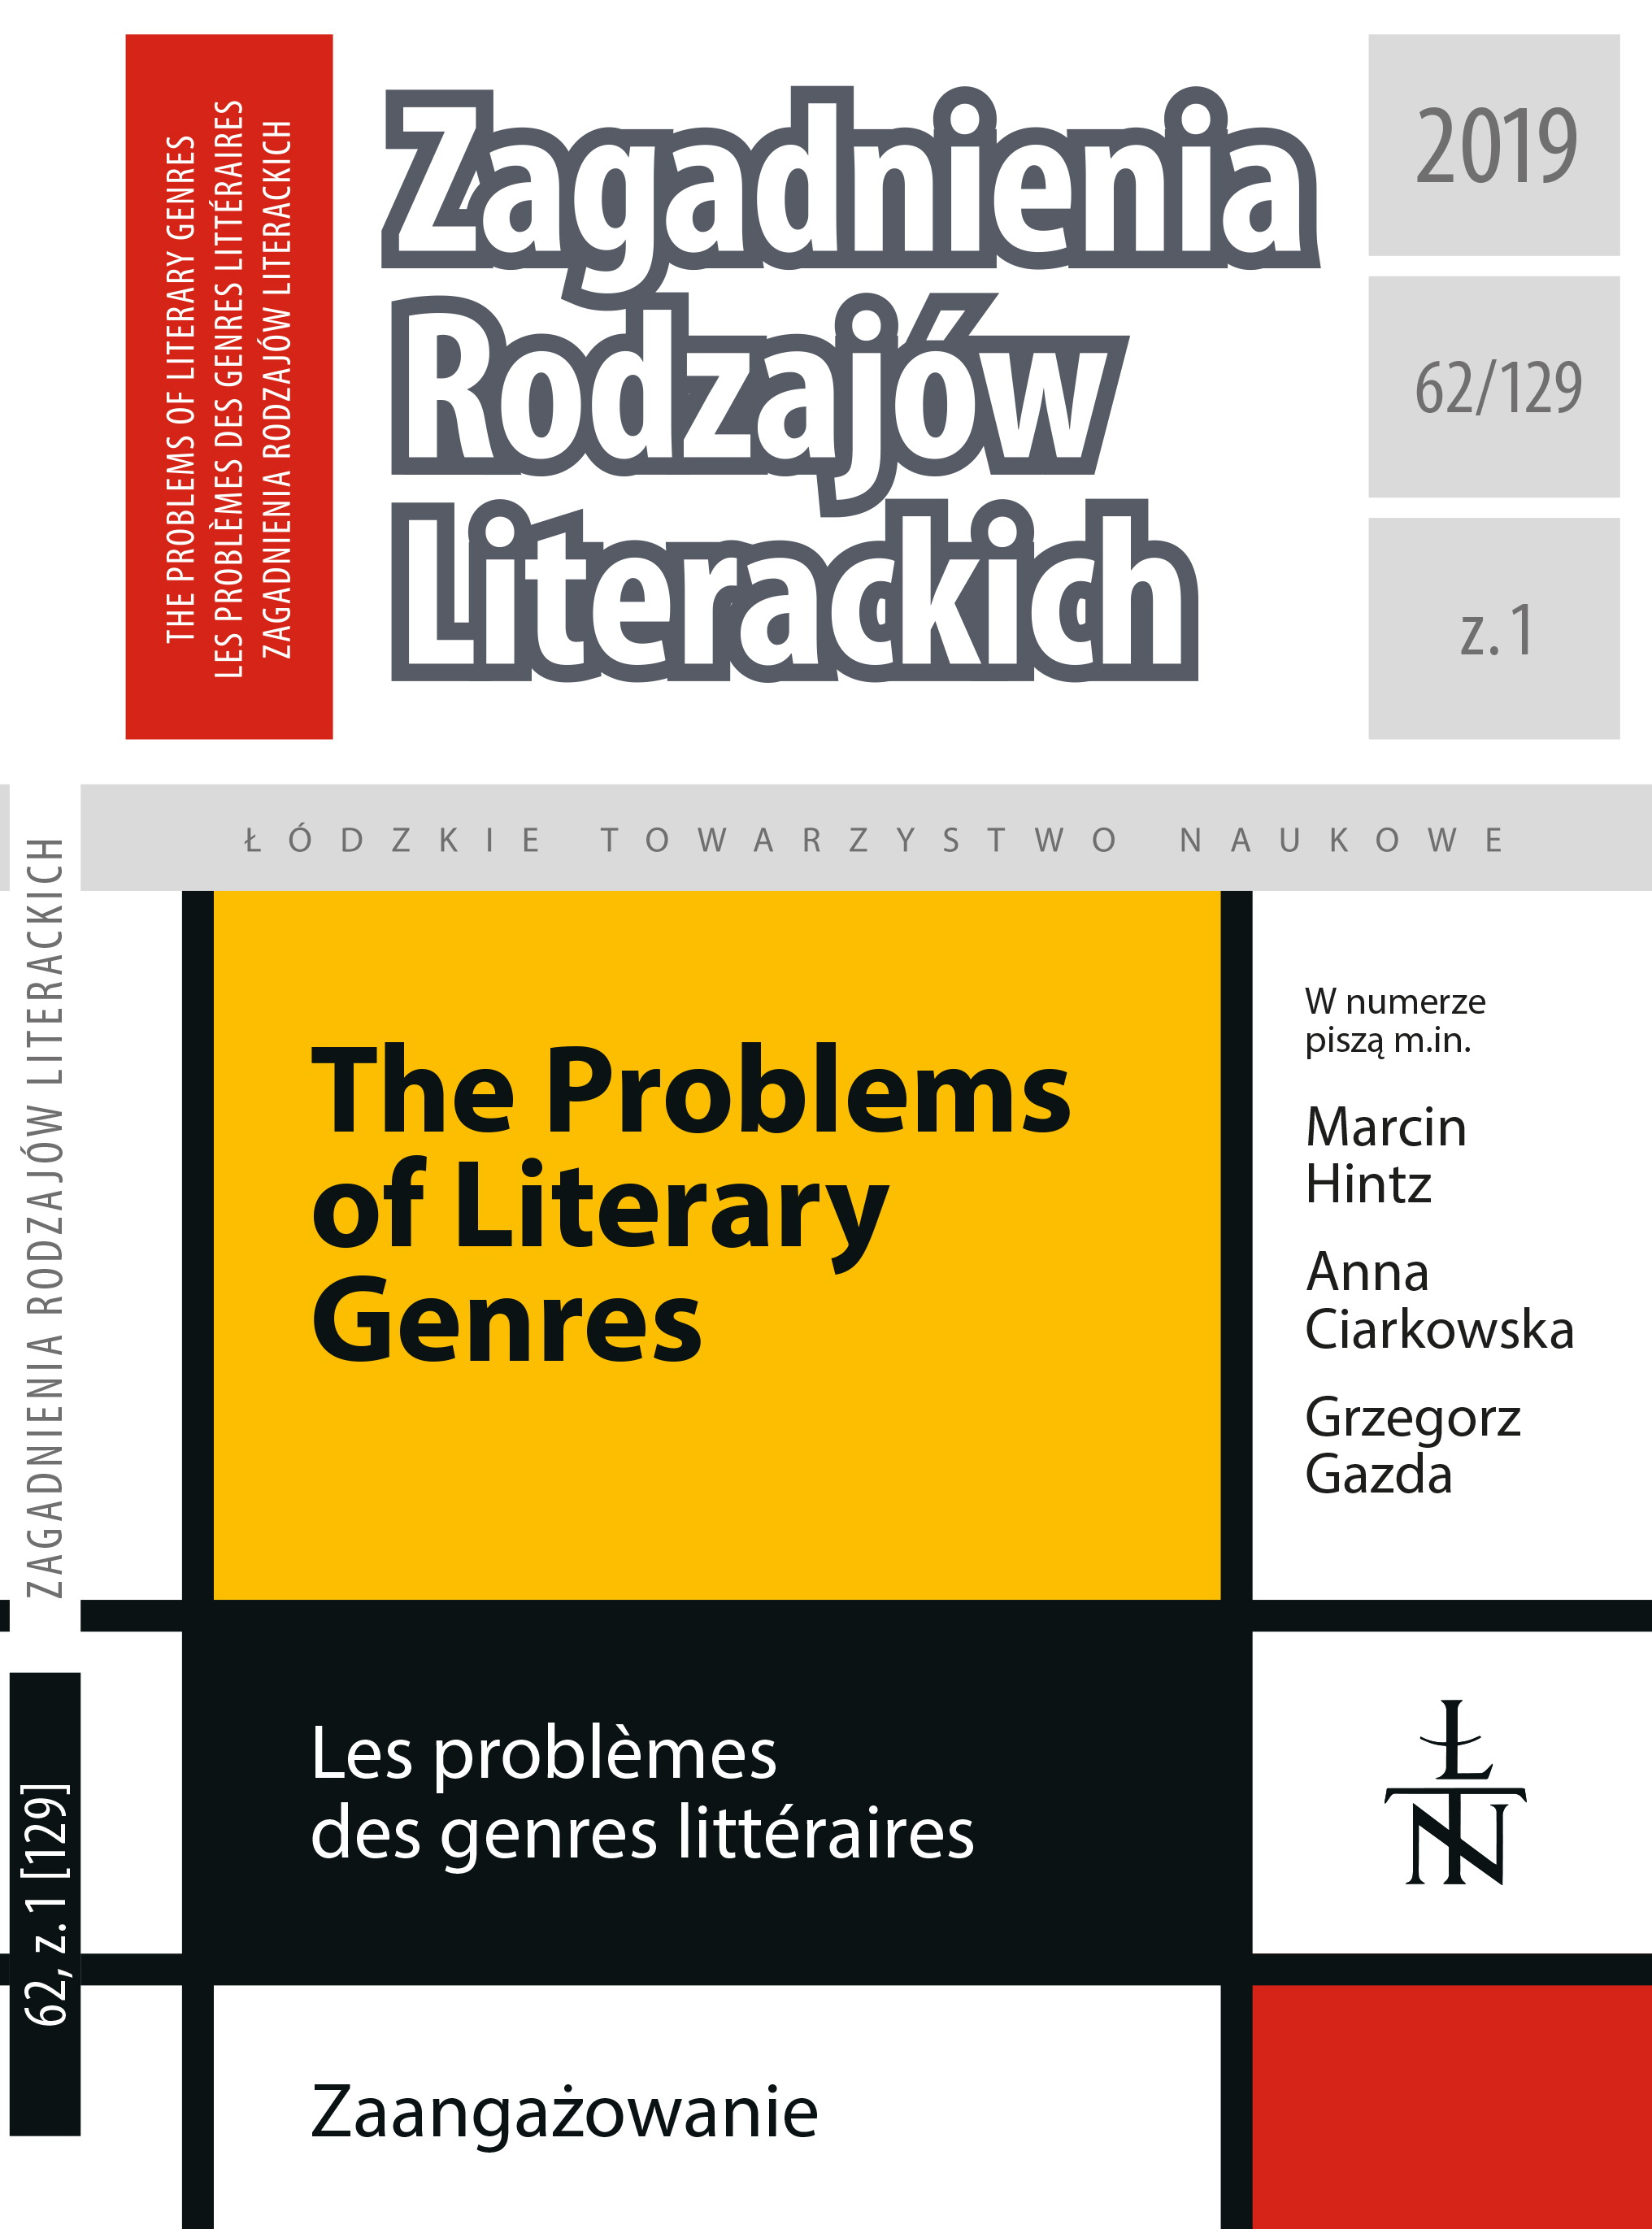 In search of the literary and philosophical koinè - on modern language of literary and philosophical reflection Cover Image